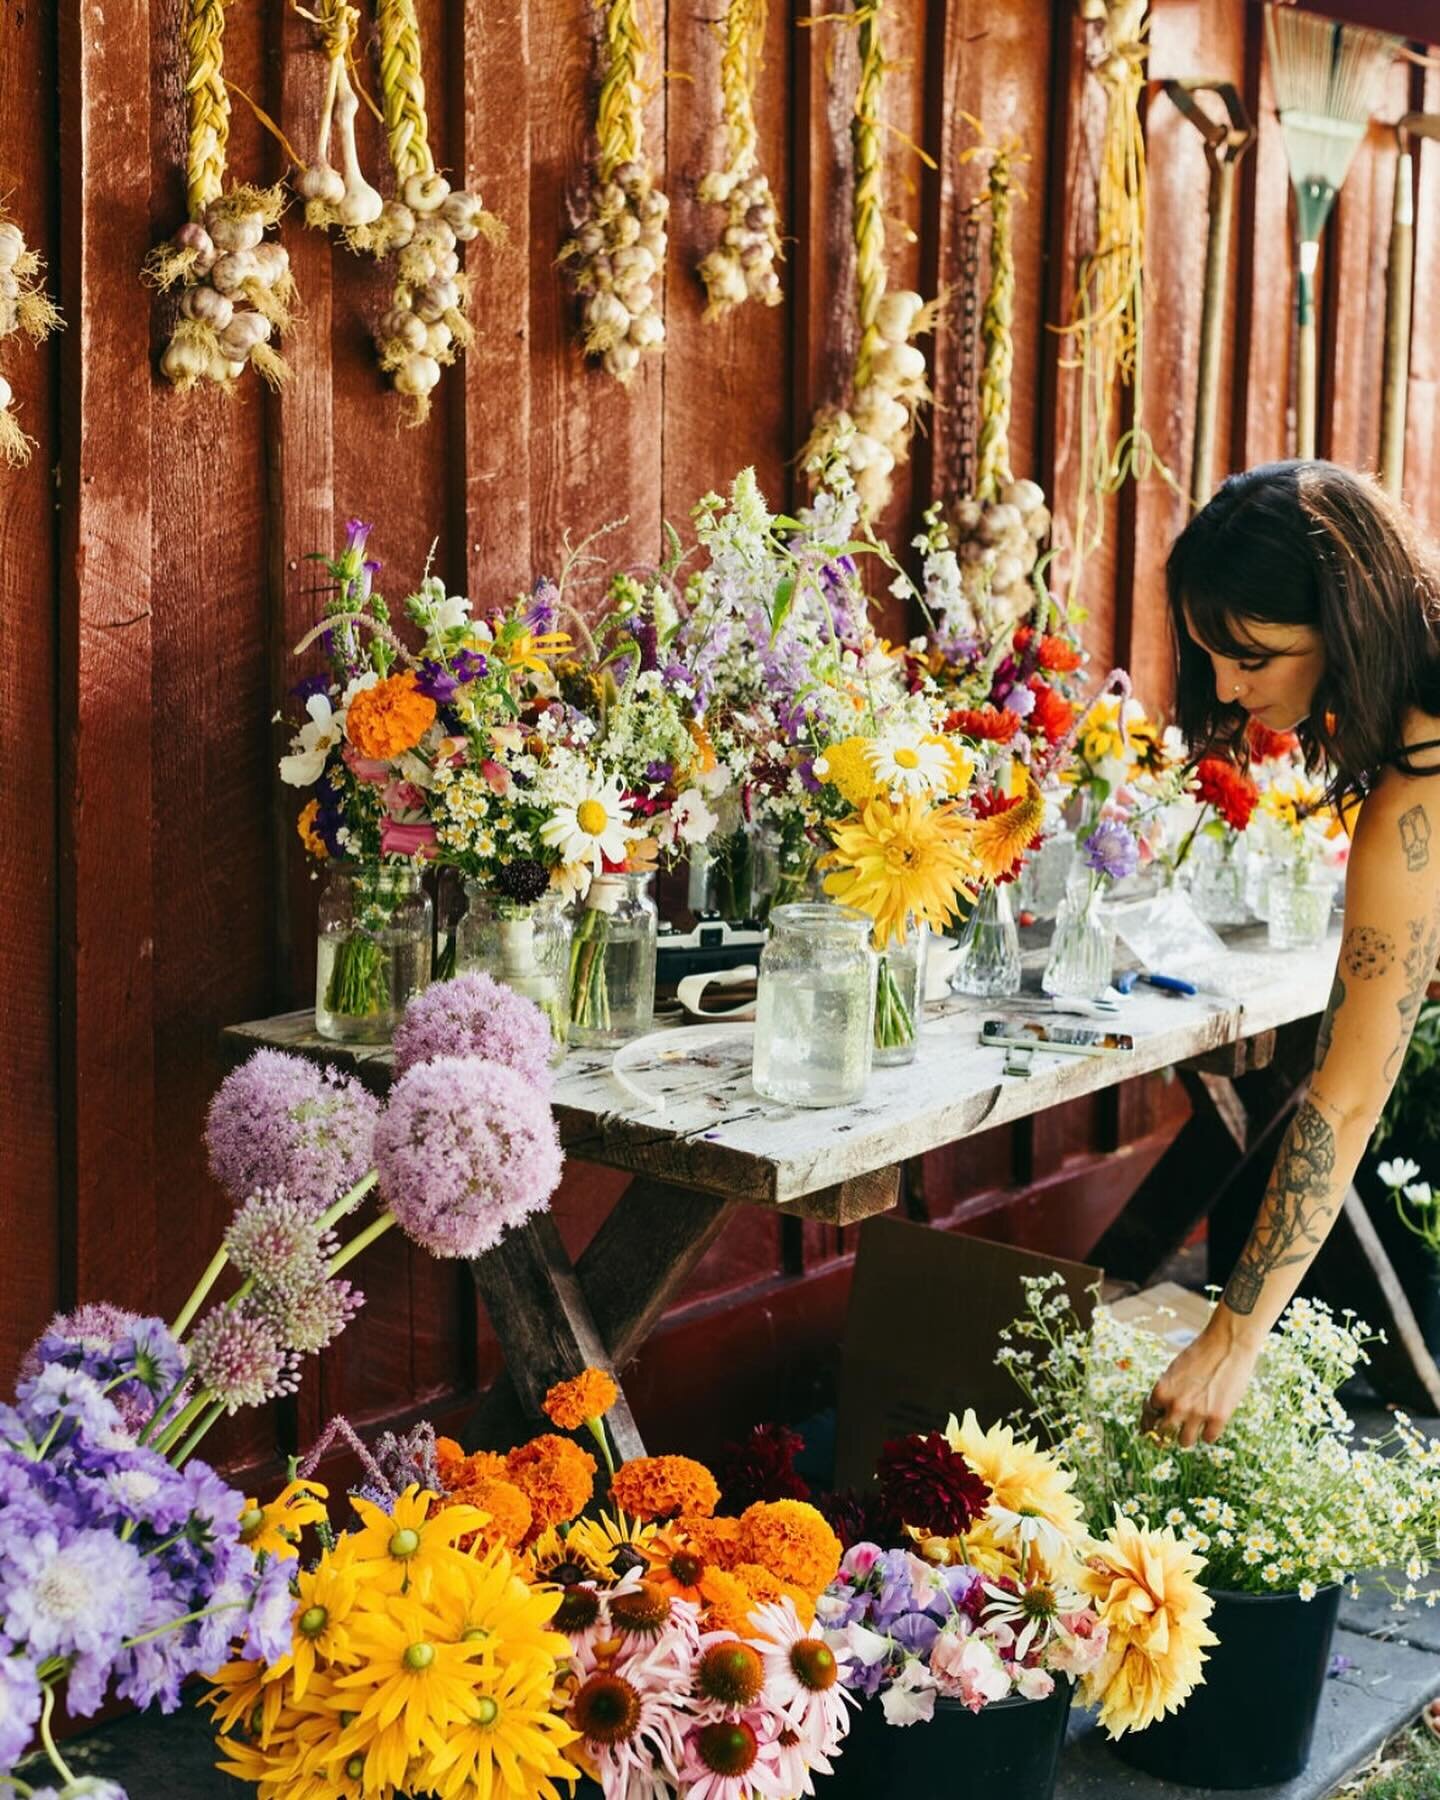 Physically, we&rsquo;re all here gearing up for the long dark winter ahead; but mentally, I&rsquo;m here: arranging flowers on the side of a red barn, surrounded by every color of locally grown wildflowers, sweating profusely in nearly 100 degree wea